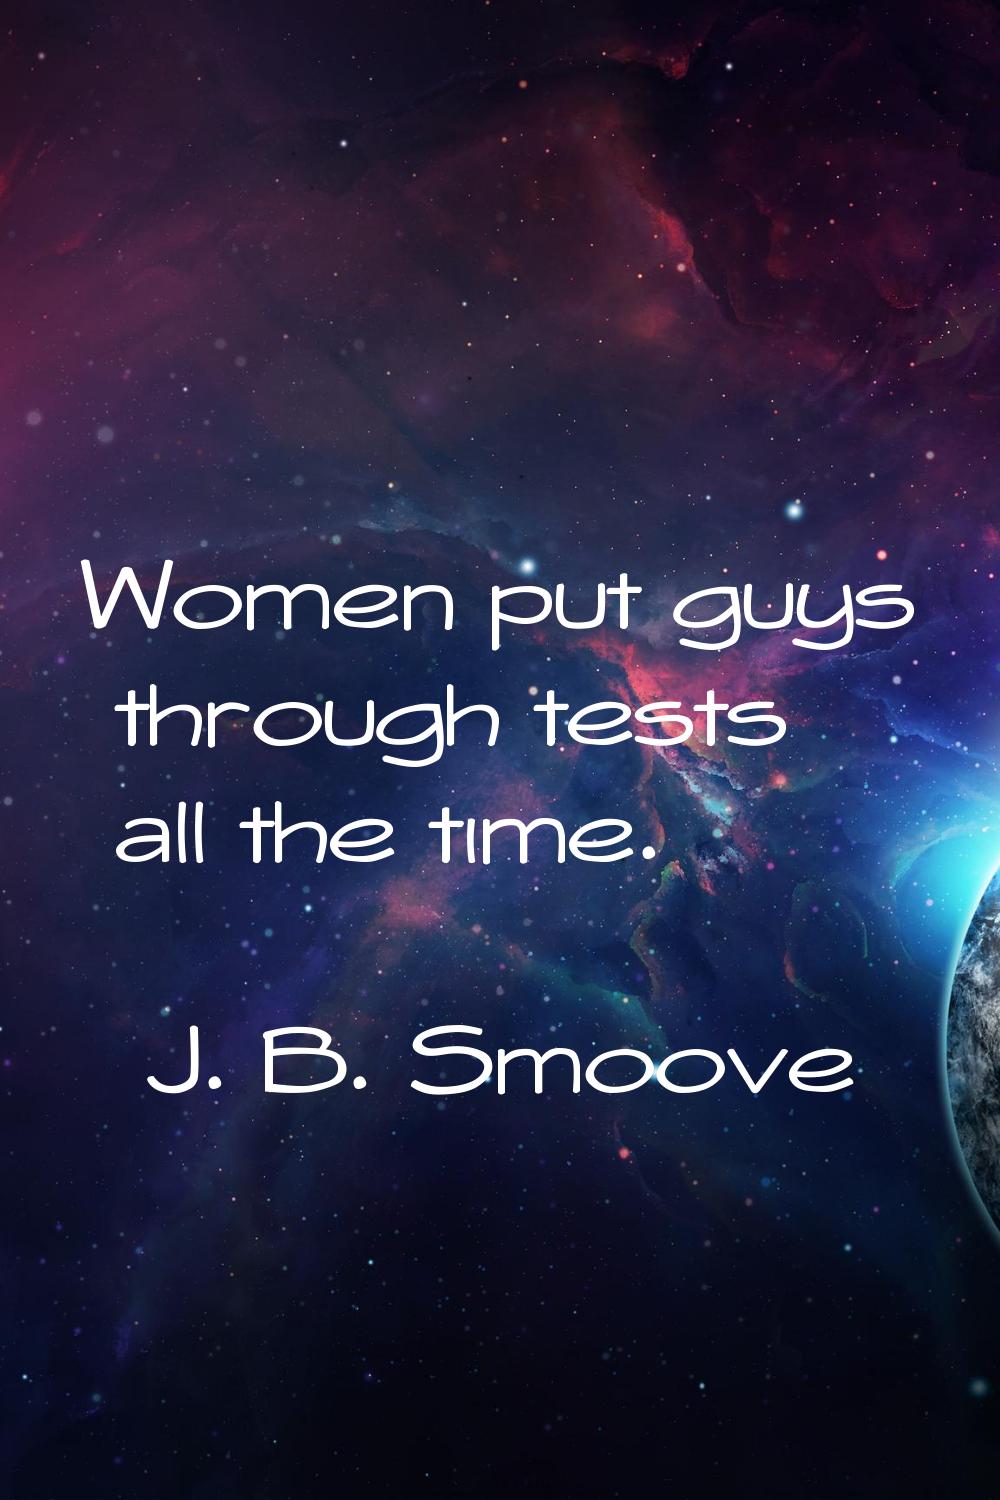 Women put guys through tests all the time.